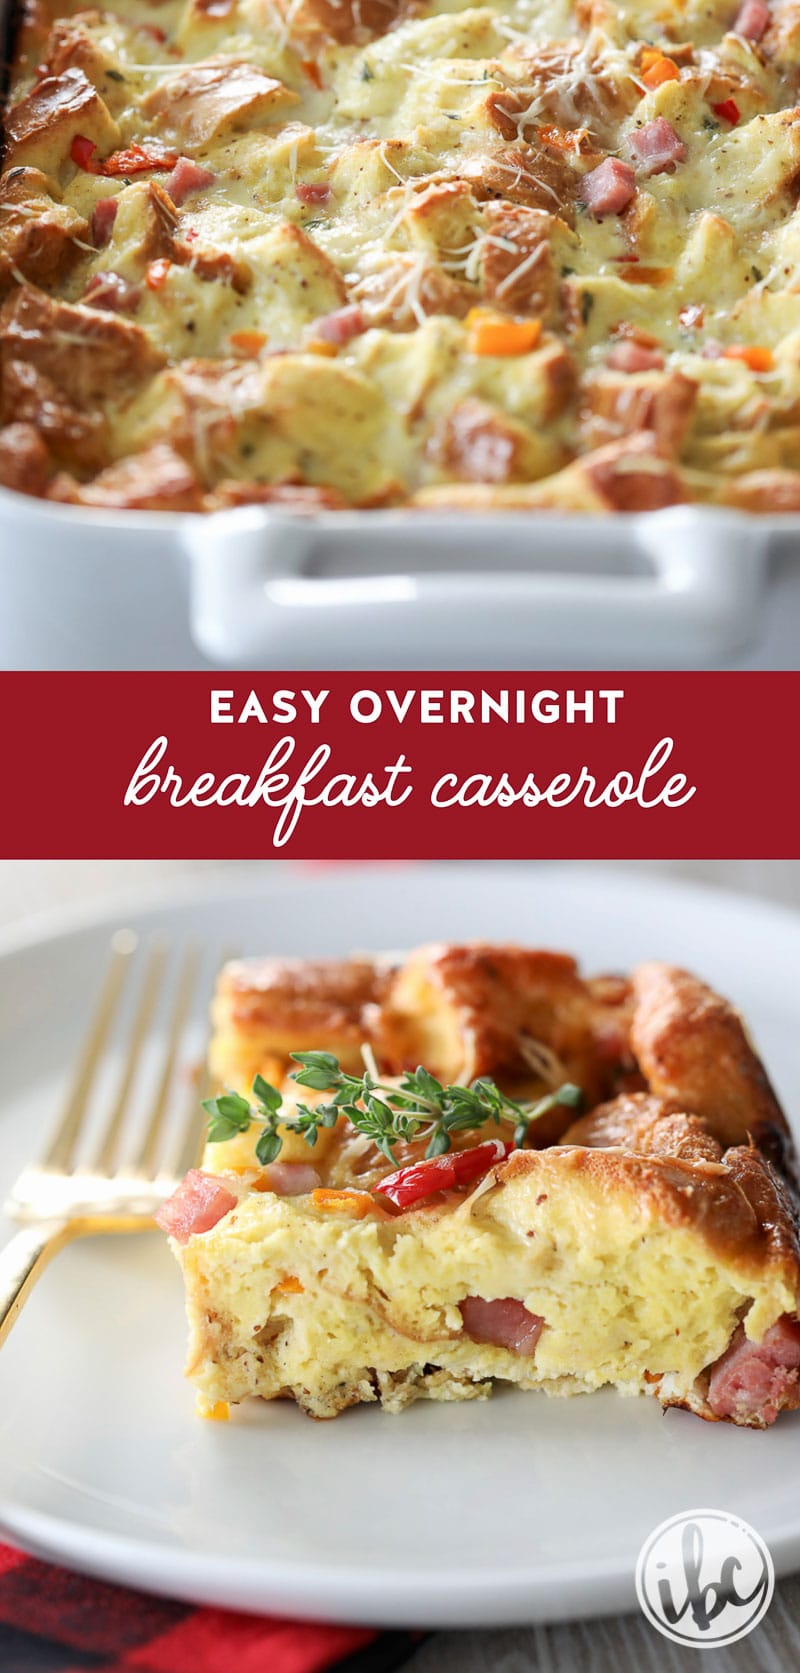 You'll love this recipe for this Easy Overnight Breakfast Casserole. So delicious! #breakfast #casserole #easy #eggs